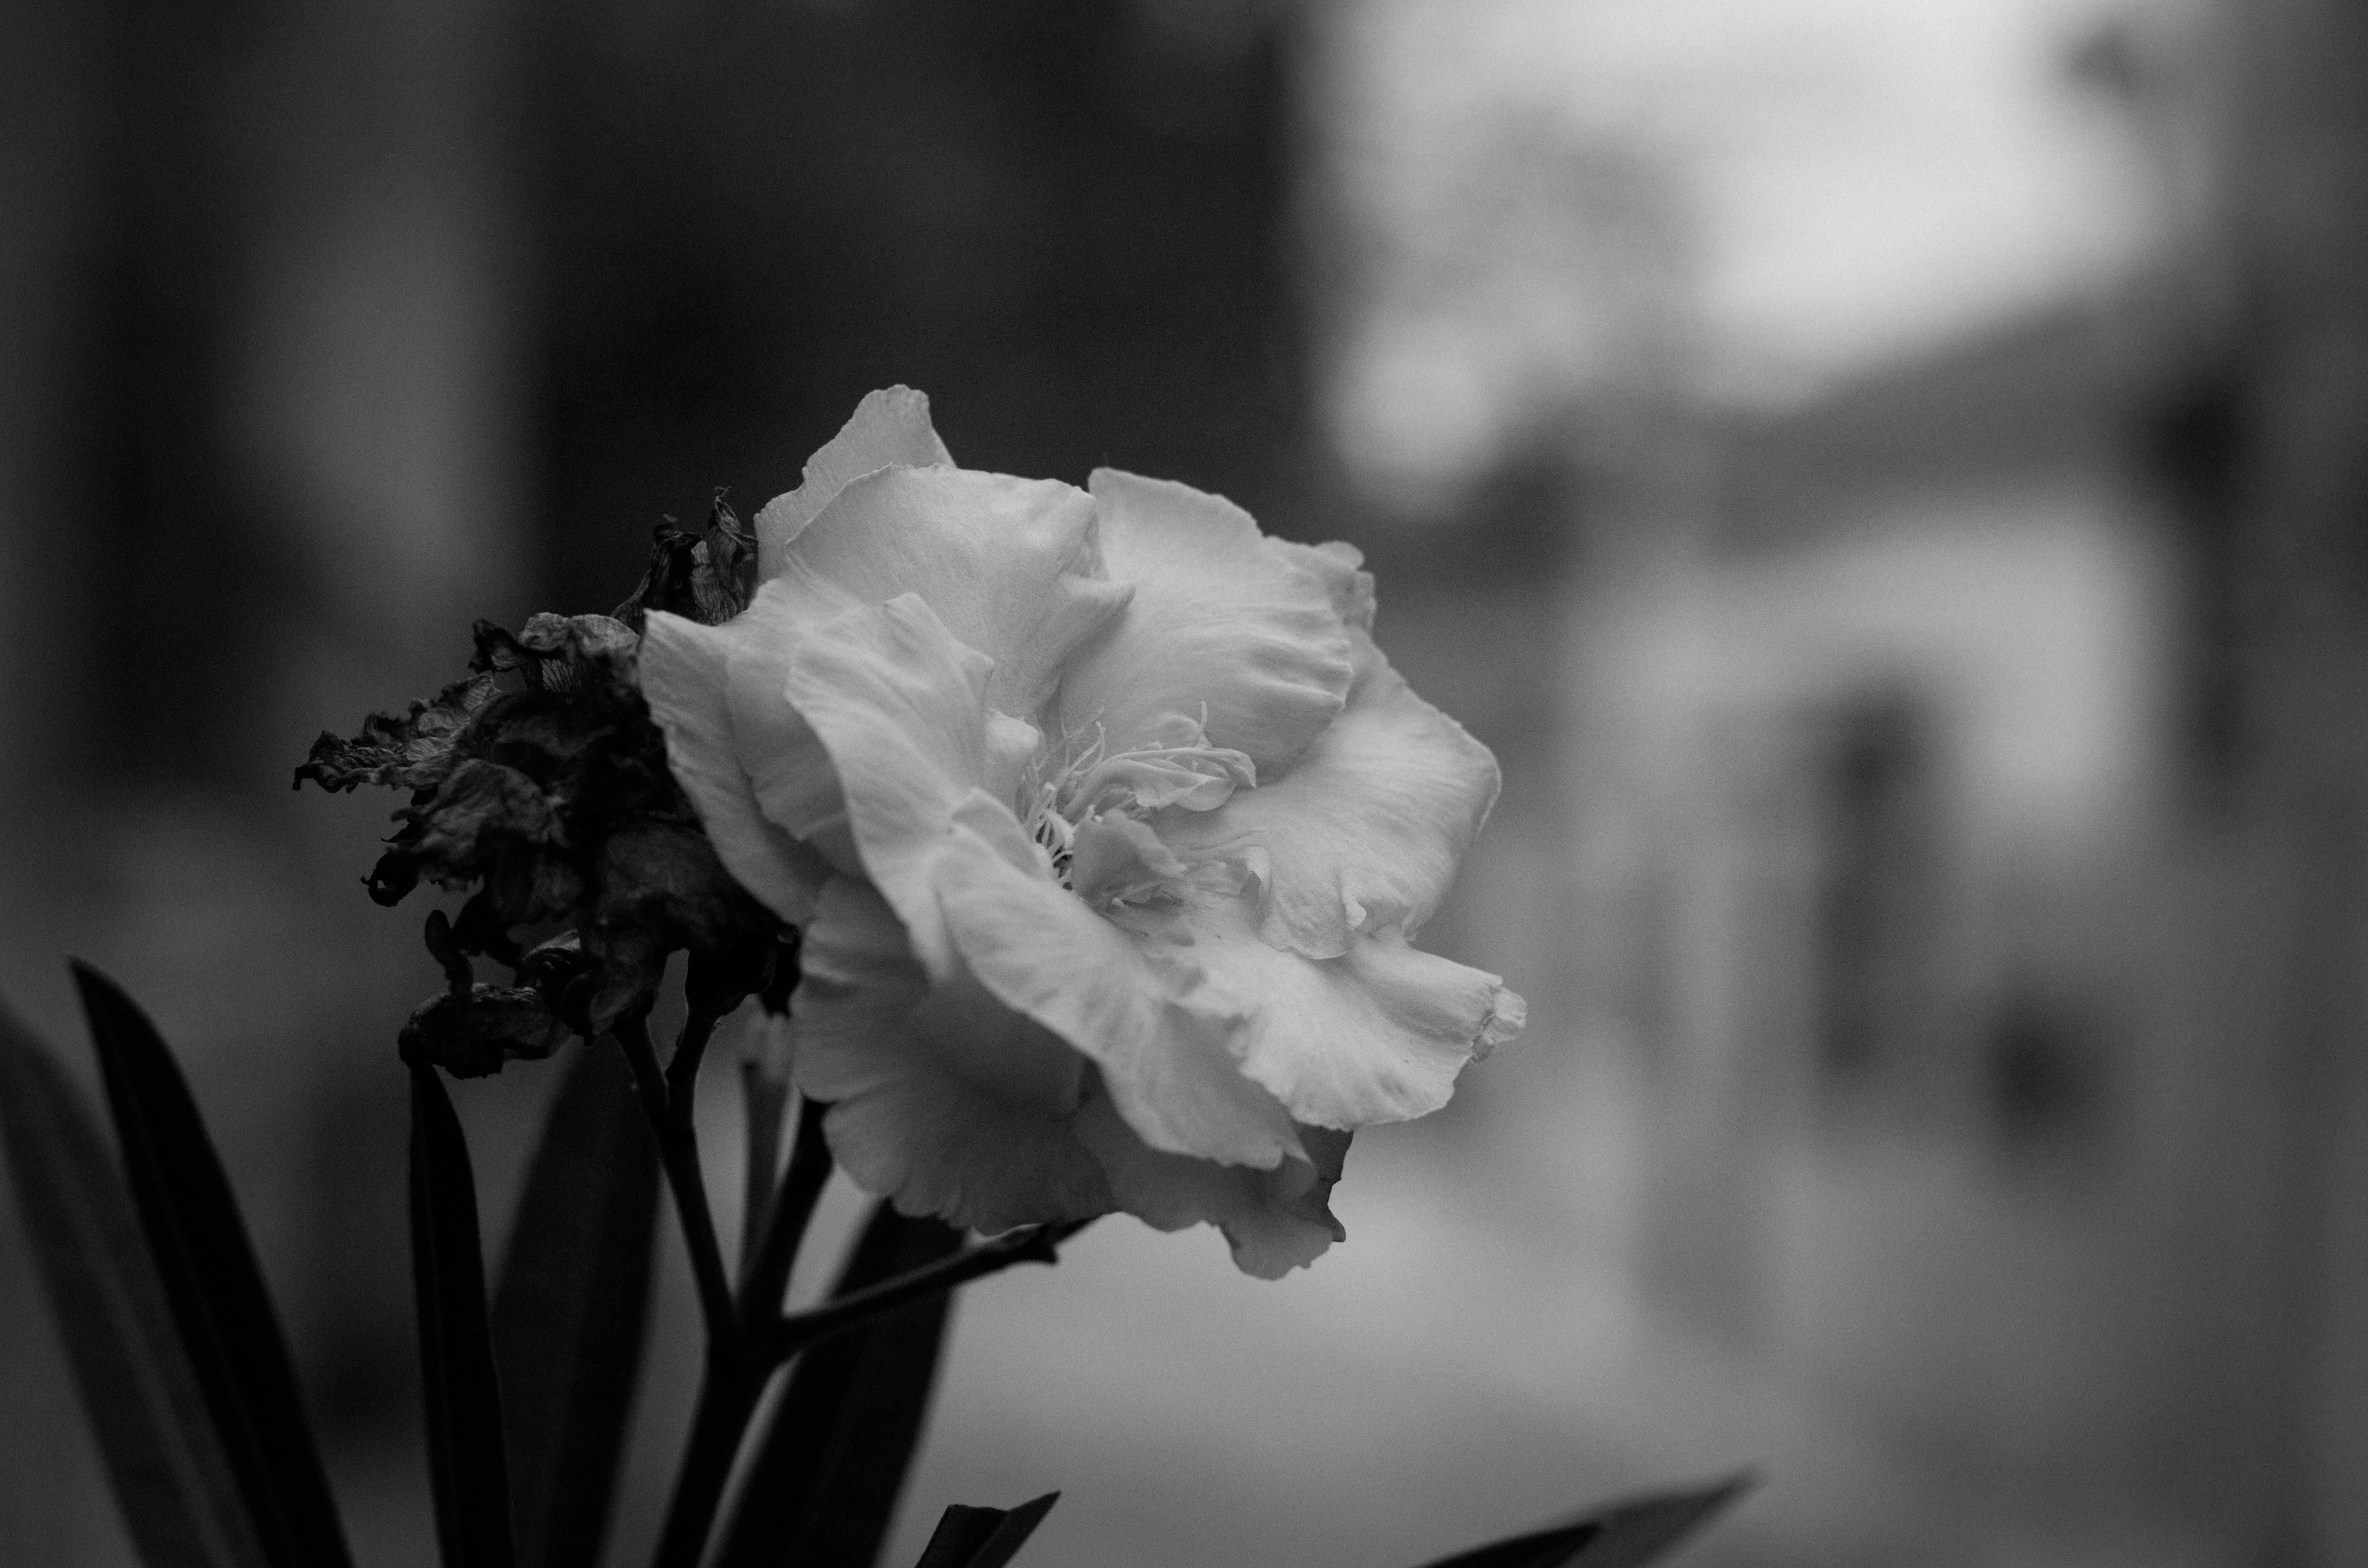 Flowers Monochrome Photography Plants Closeup Leaves Blurry Background Blurred 4928x3264